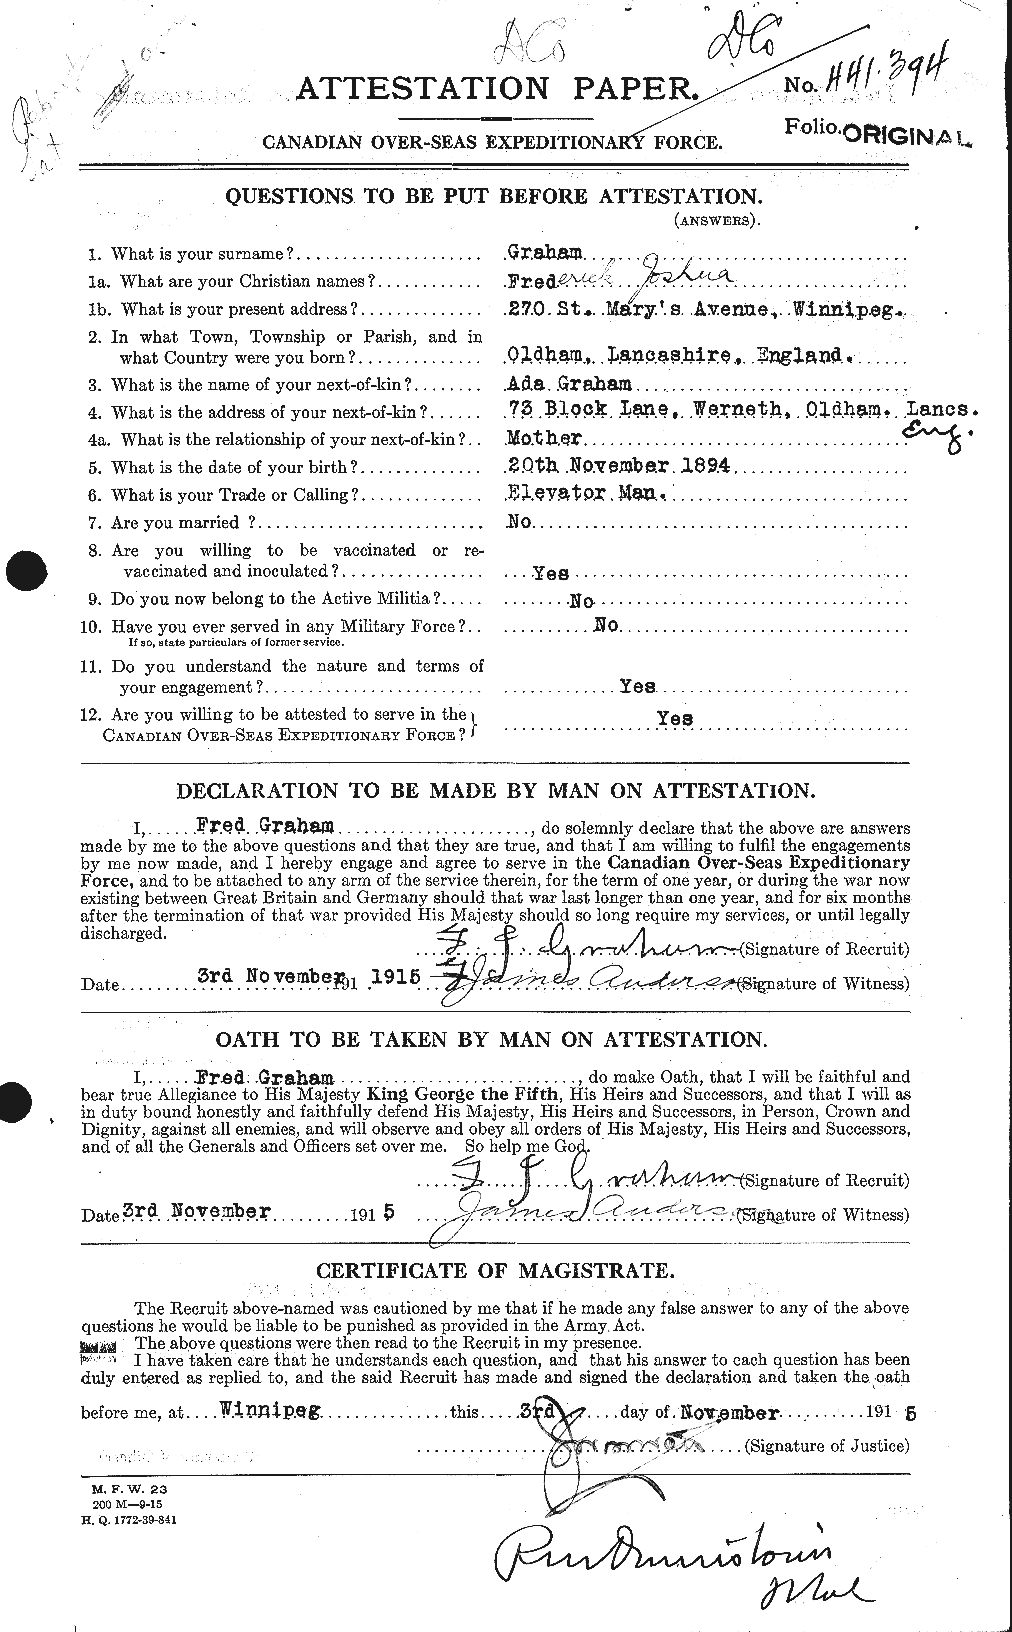 Personnel Records of the First World War - CEF 357615a